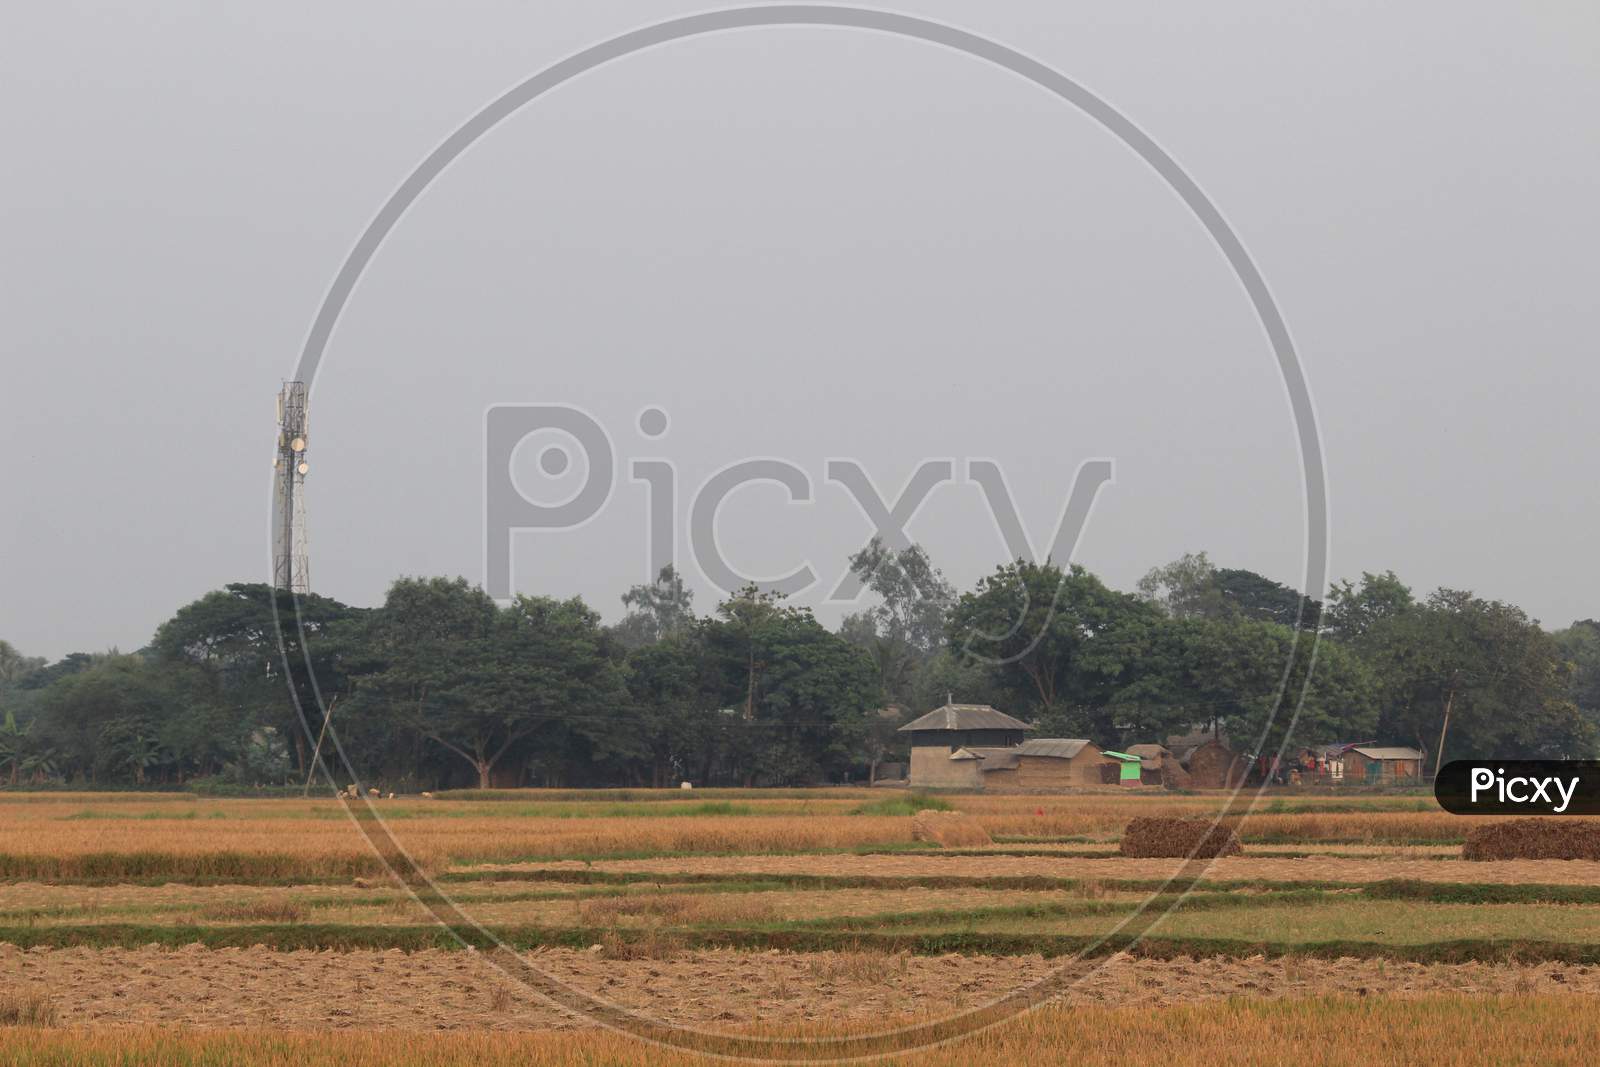 Paddy agriculture in West Bengal, India